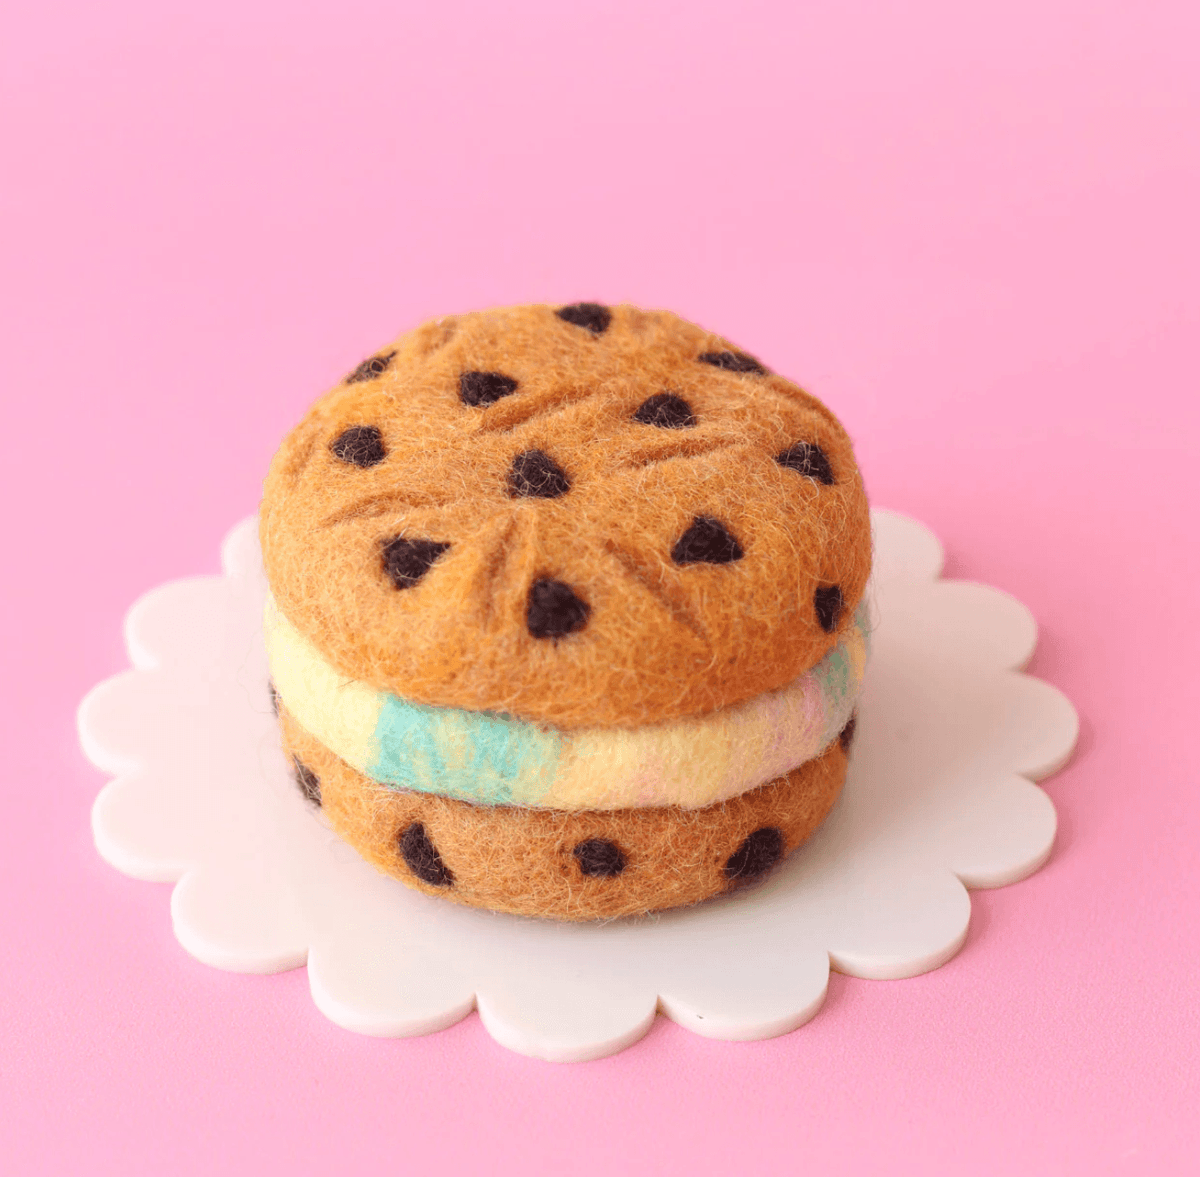 The Curated Parcel - Ice Cream Sandwich 